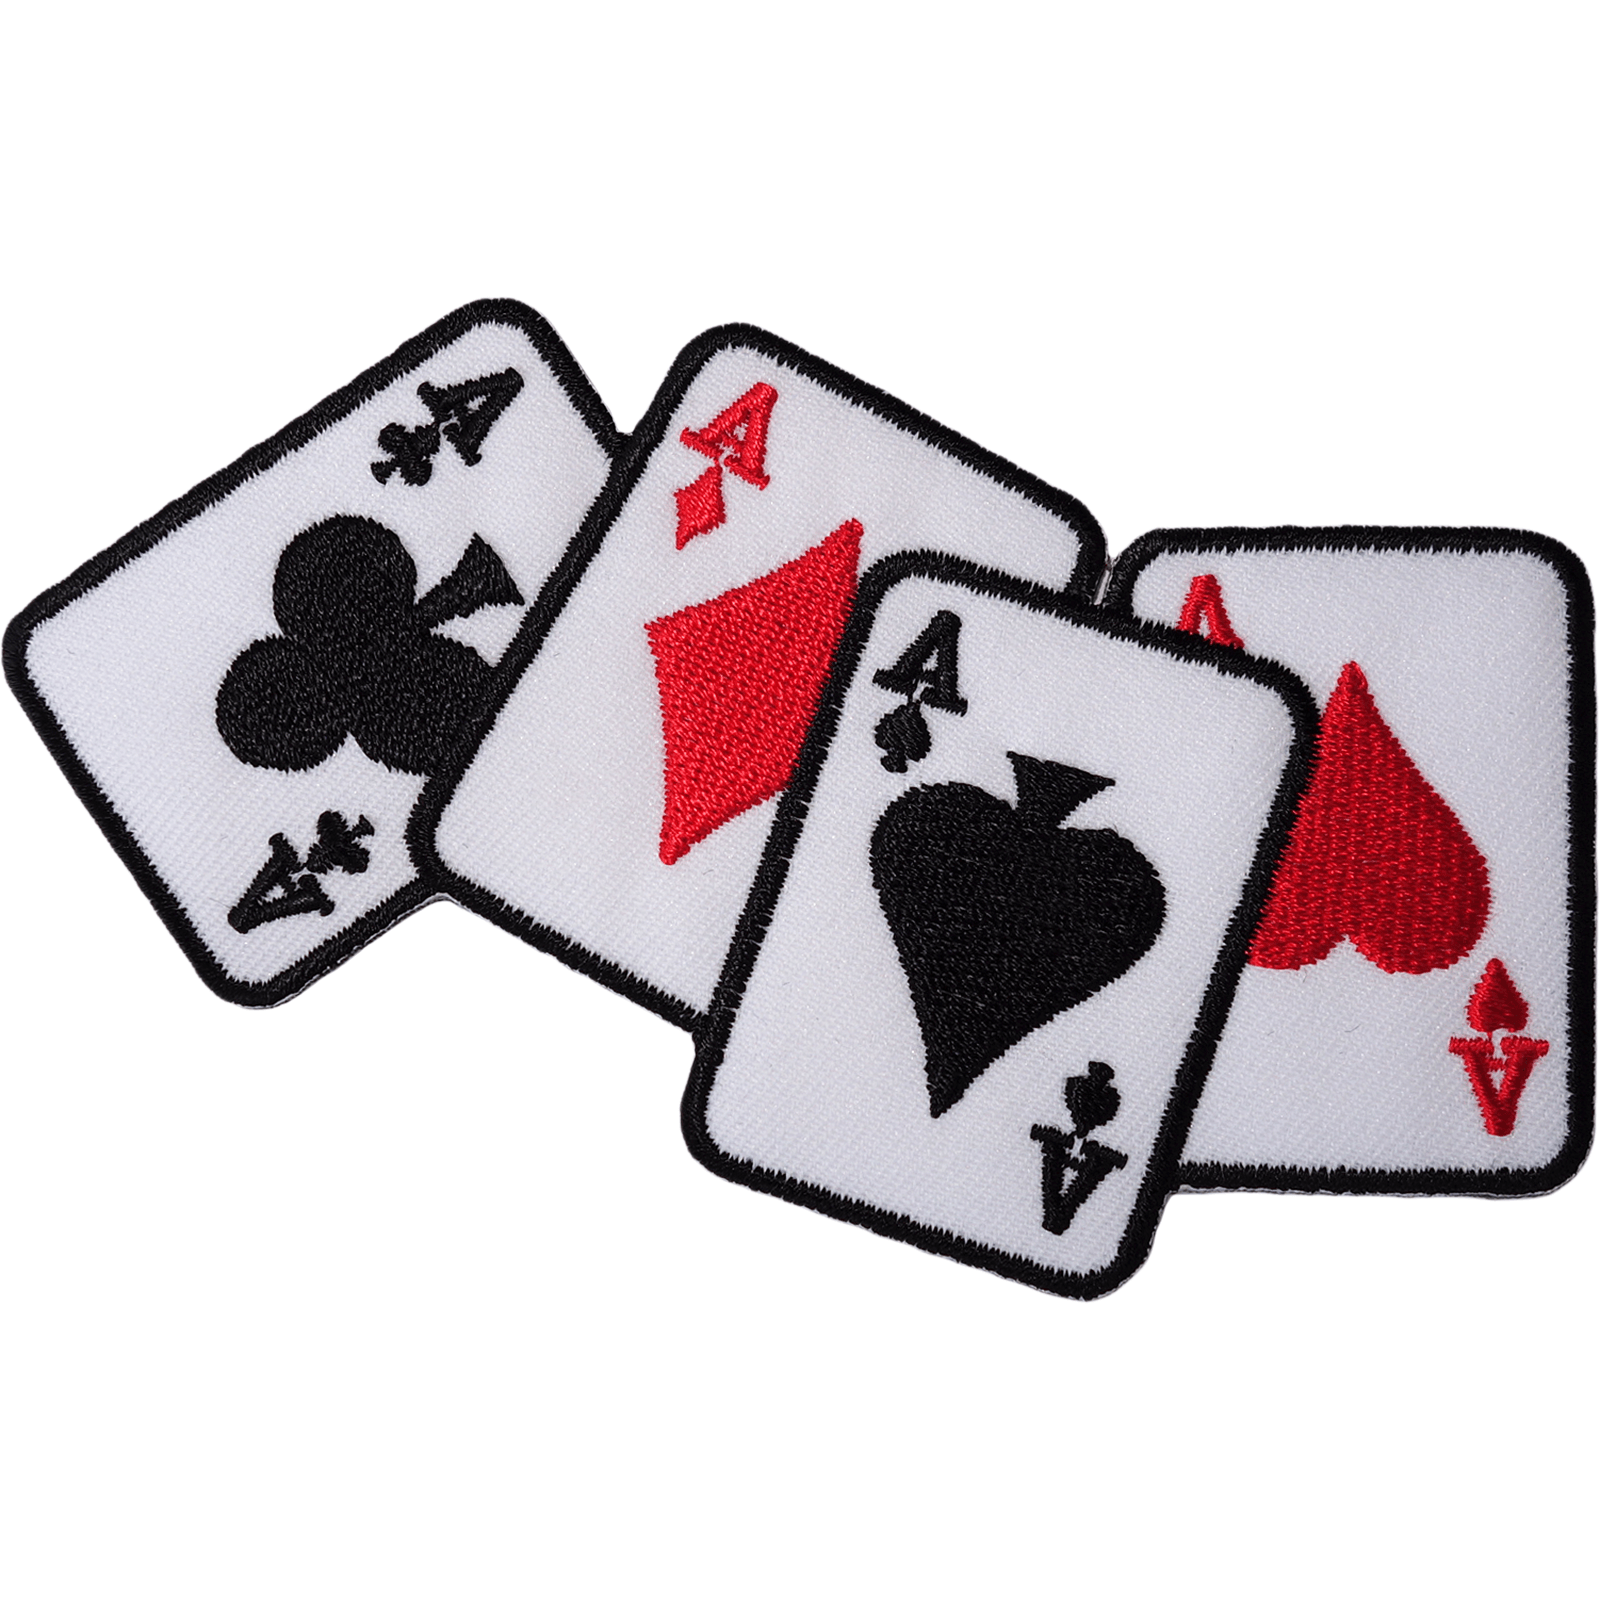 Playing Cards Patch Iron Sew On Embroidered Badge Spades Hearts Diamonds Clubs